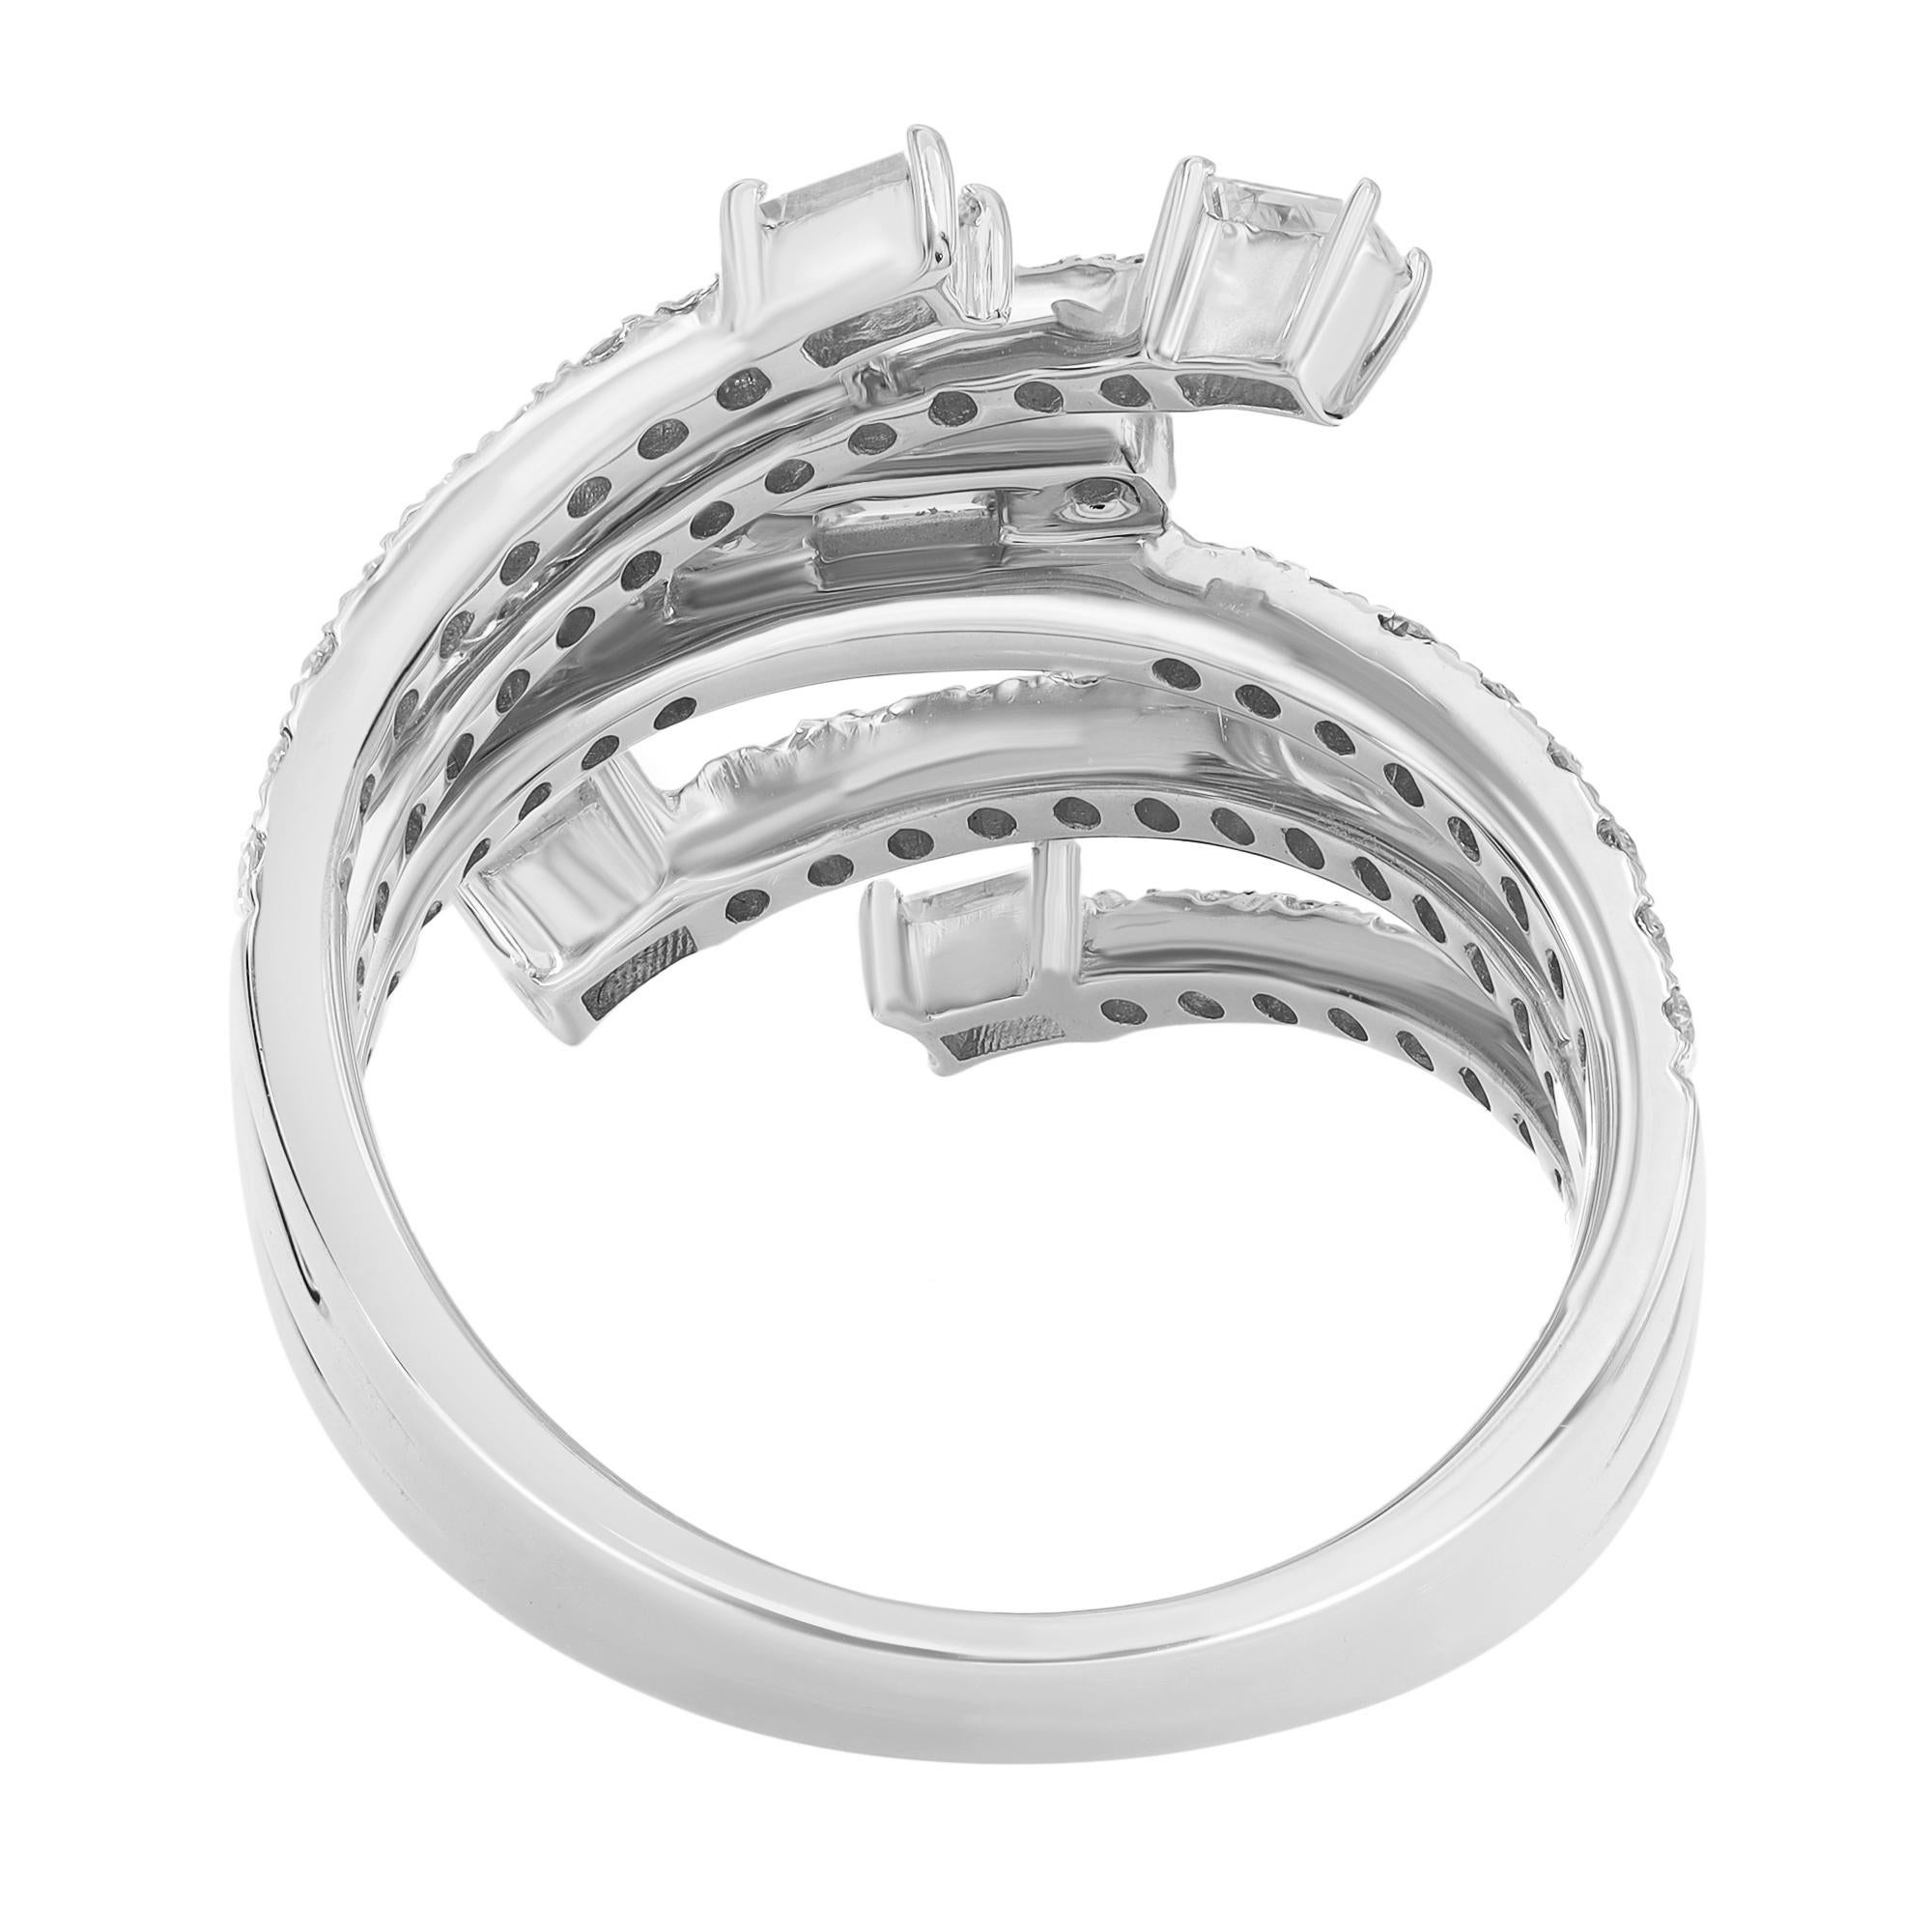 Modern Baguette & Round Cut Diamond Statement Ring 18K White Gold 1.20Cttw Size 6.5 For Sale